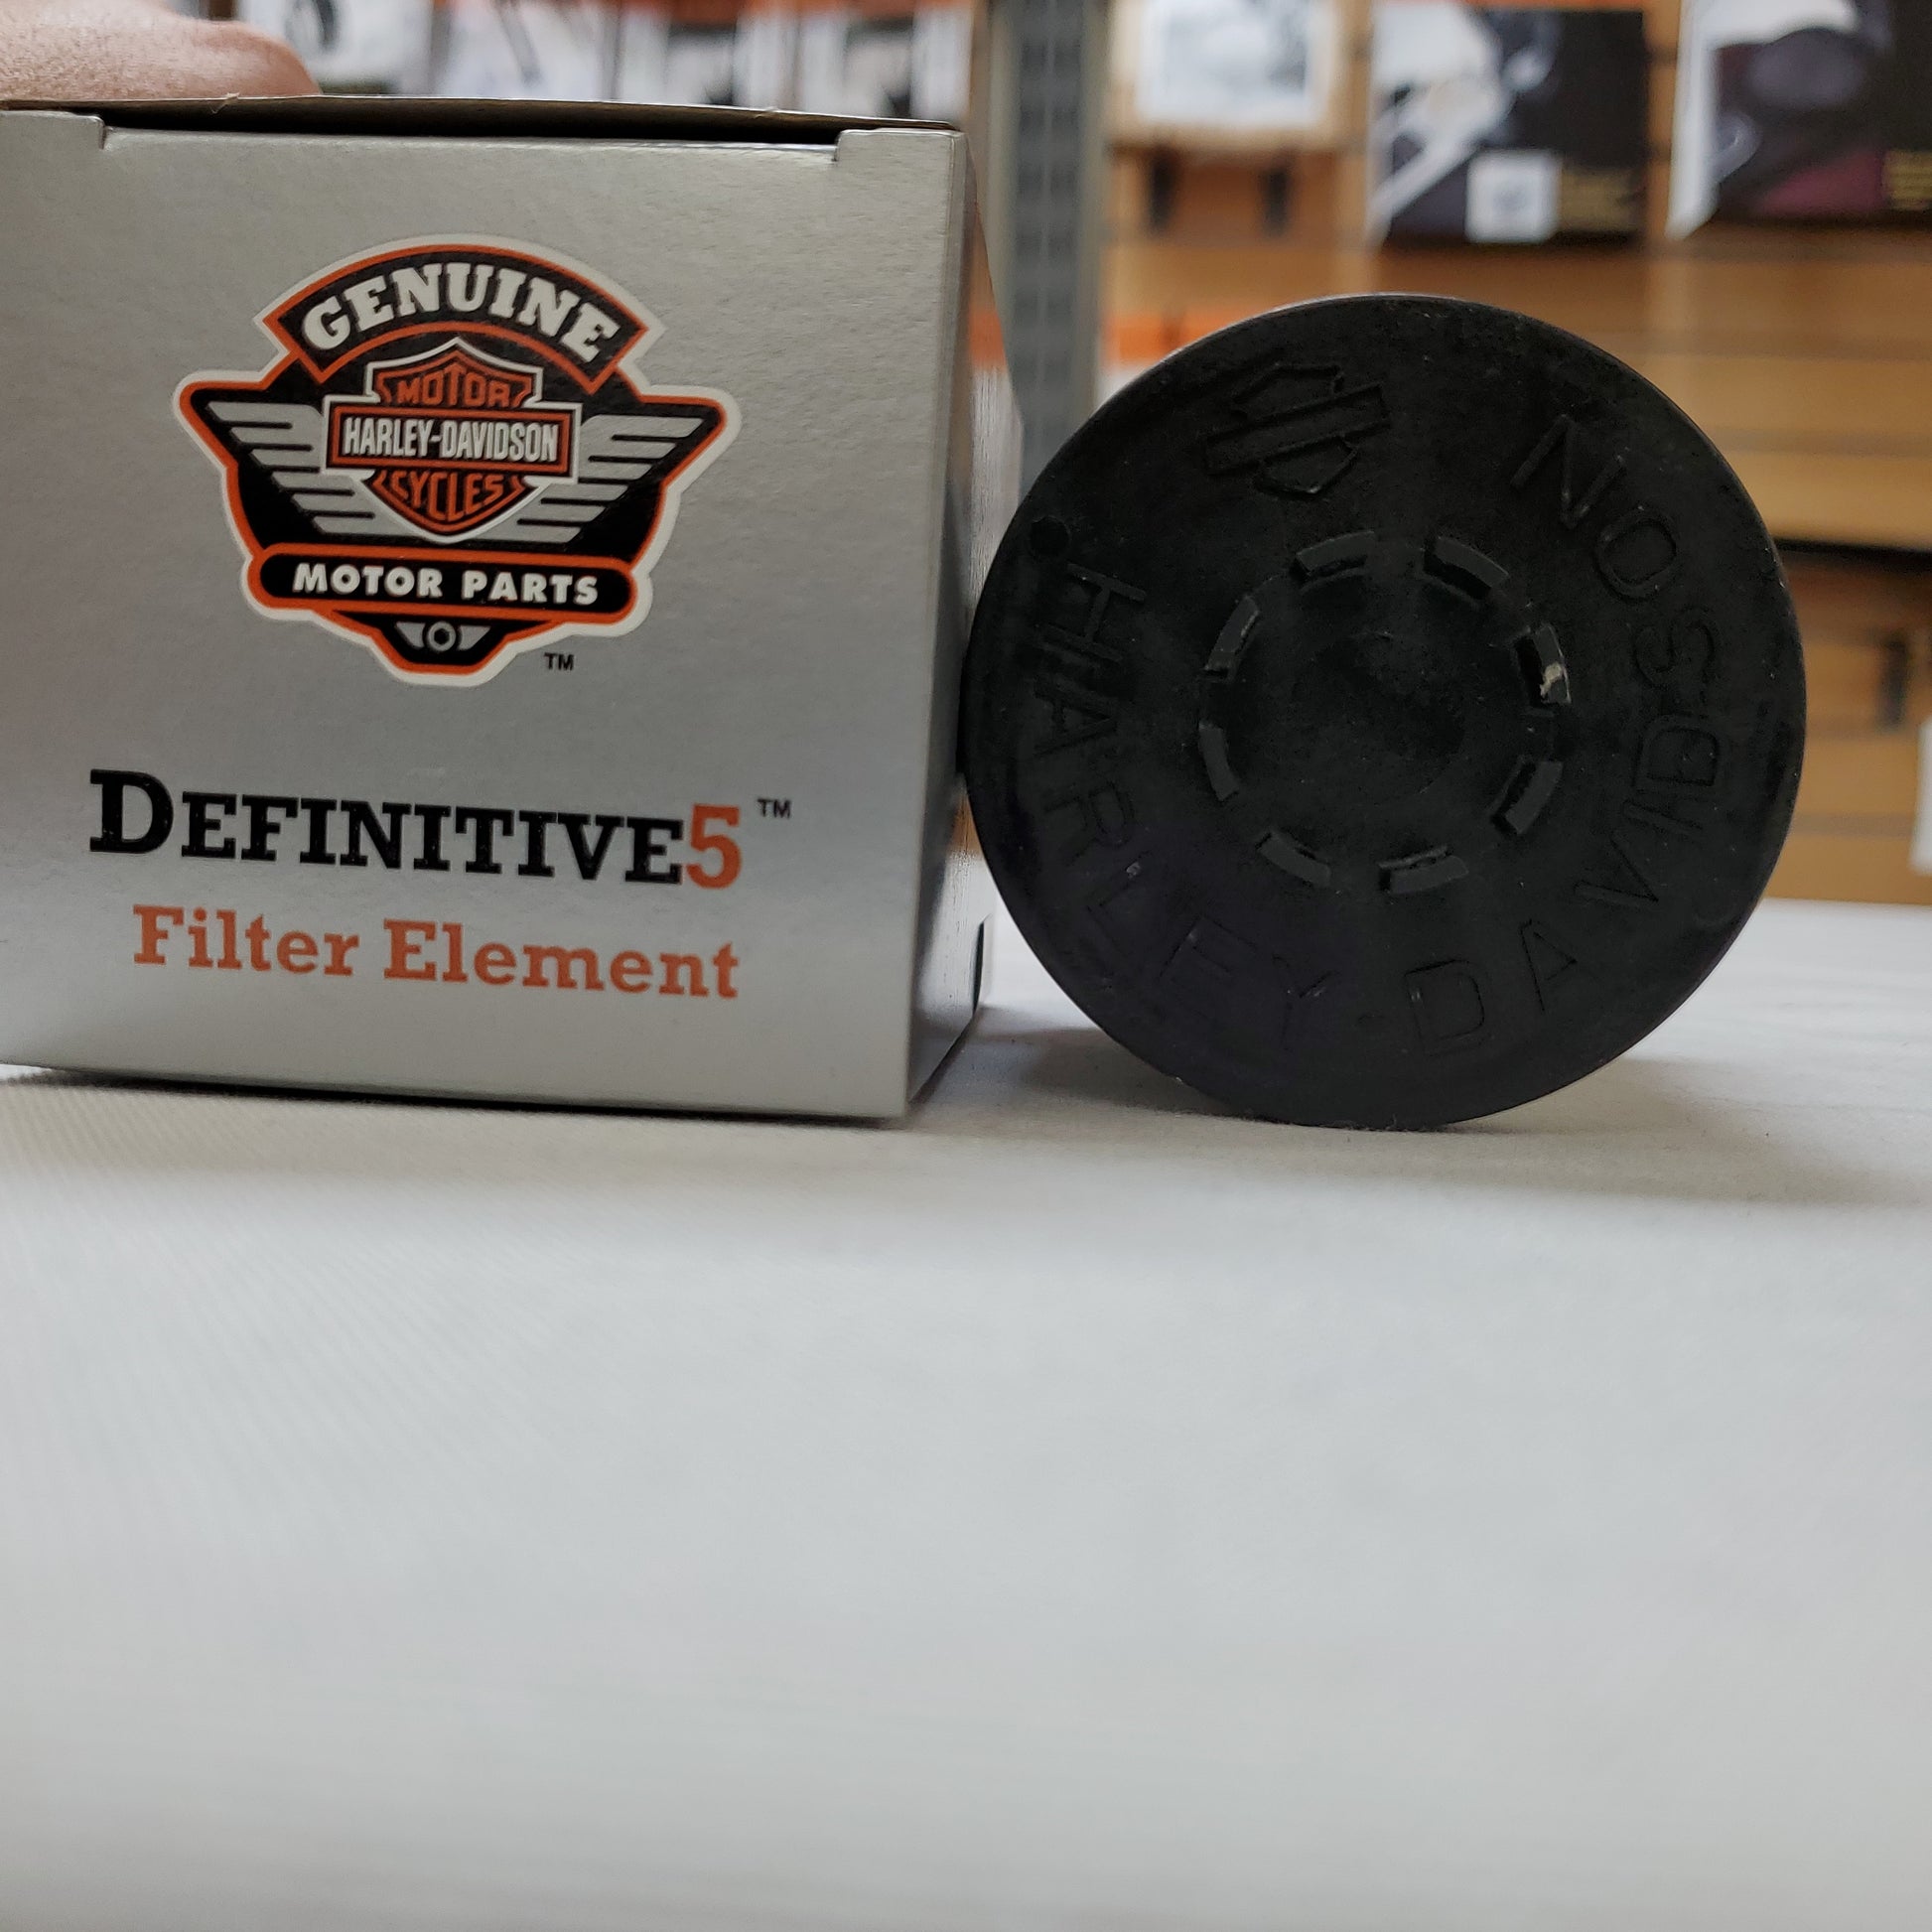 Replaceable oil filter element-Definitive5  Part#63834-07  Fits: Twin Cam models with Definitive filtration system., Stonewall Harley-Davidson